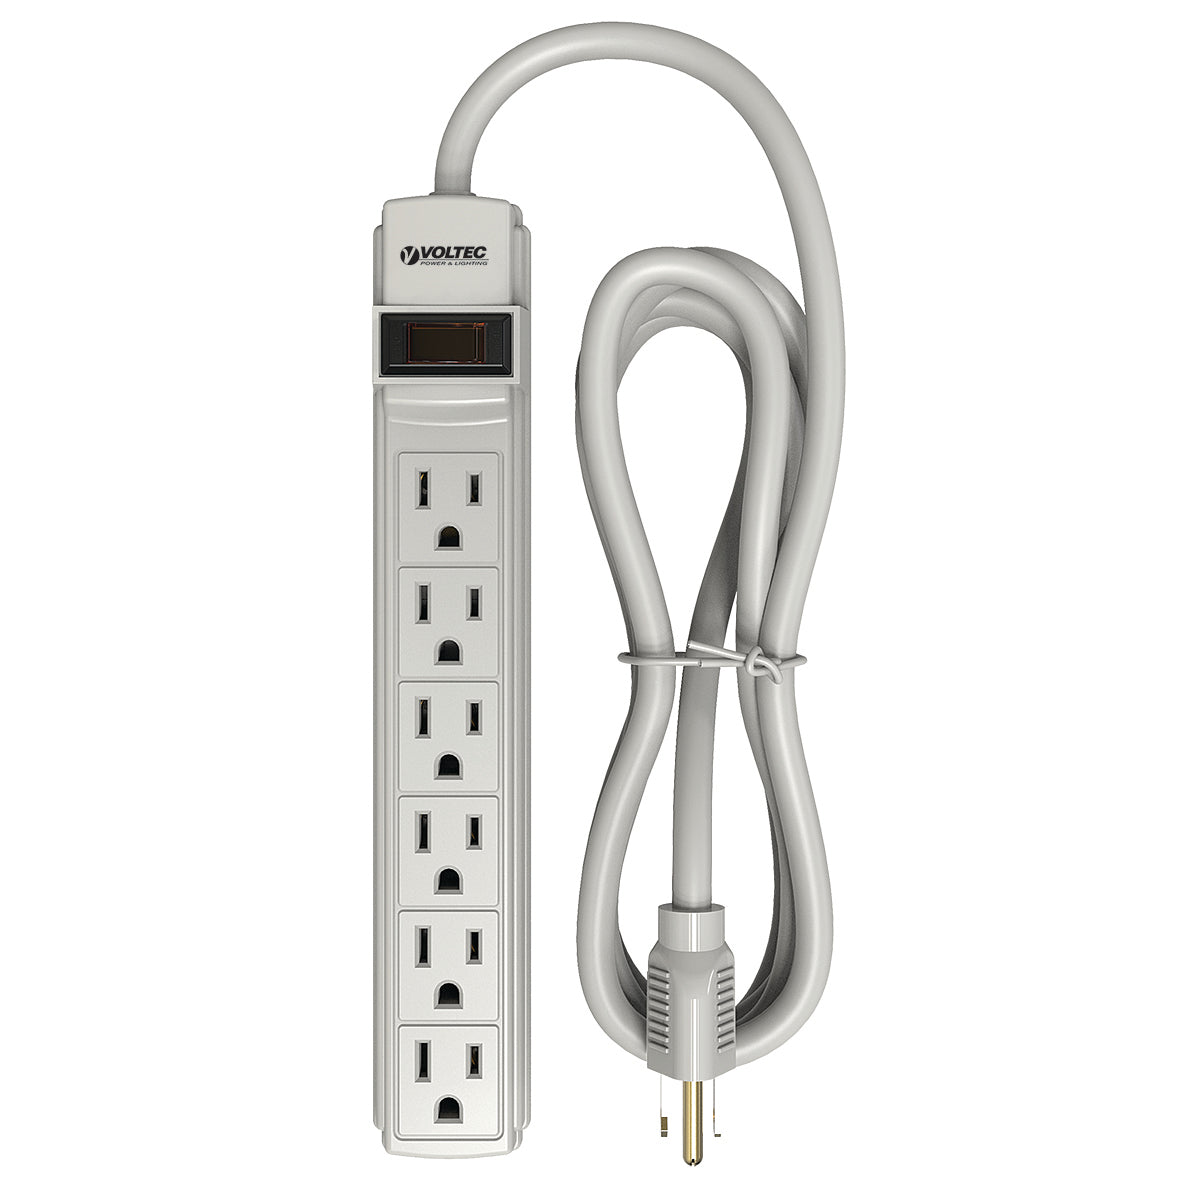 6-OUTLET POWER STRIP, 14/3X6' CORD